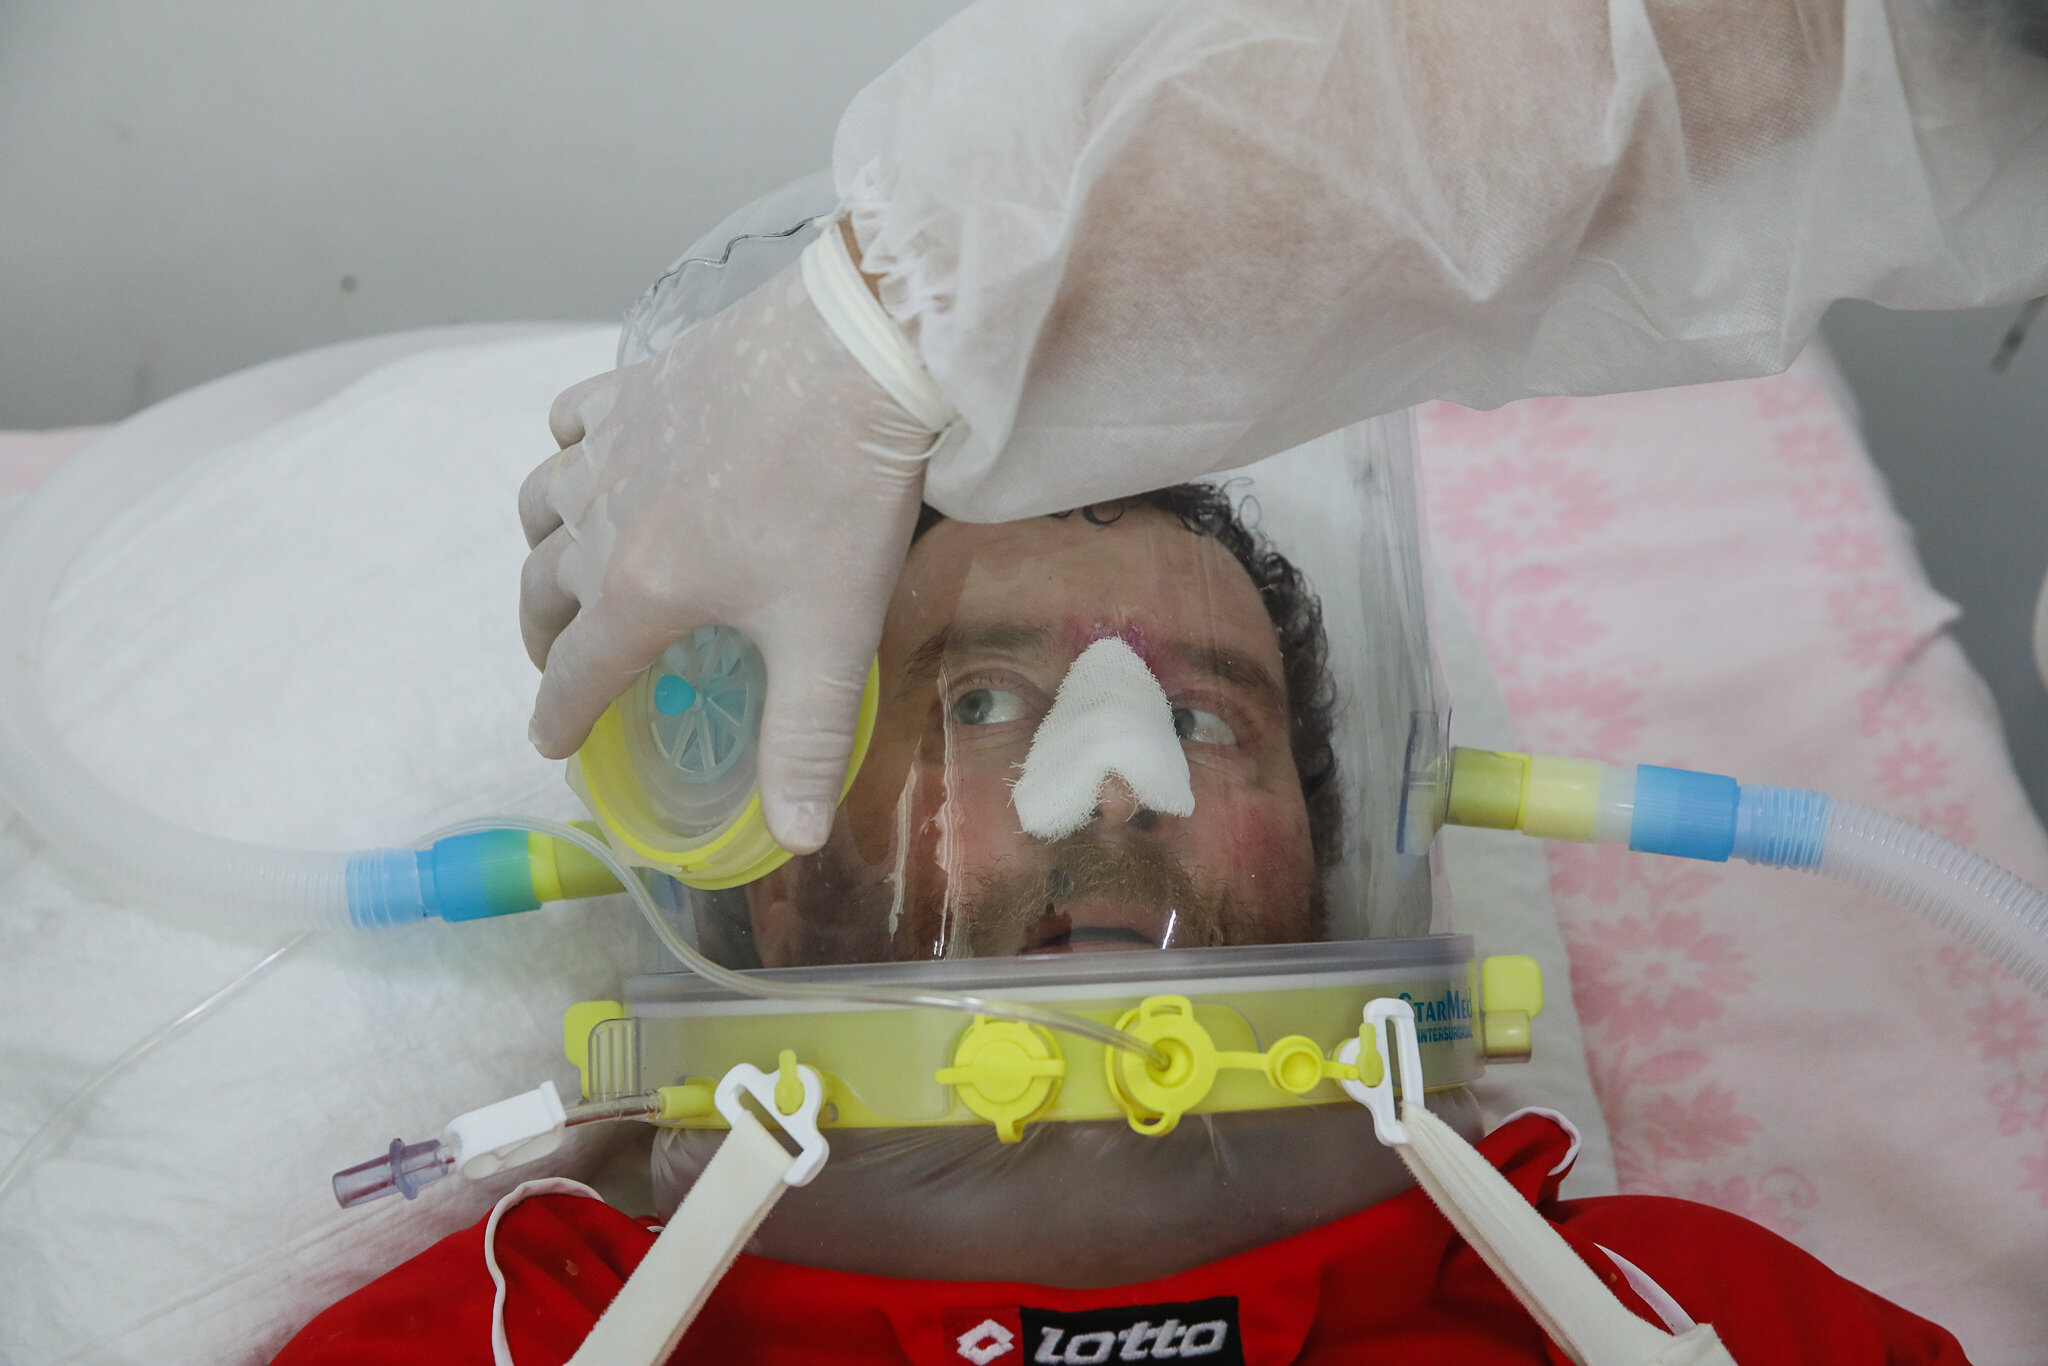 COVID-19 patient Vasyl wears a helmet supplying him with oxygen-enriched air at Kolomyia District Hospital in Ivano-Frankivsk Oblast on March 16, 2021. Vasyl has been in intensive care for nearly three months.